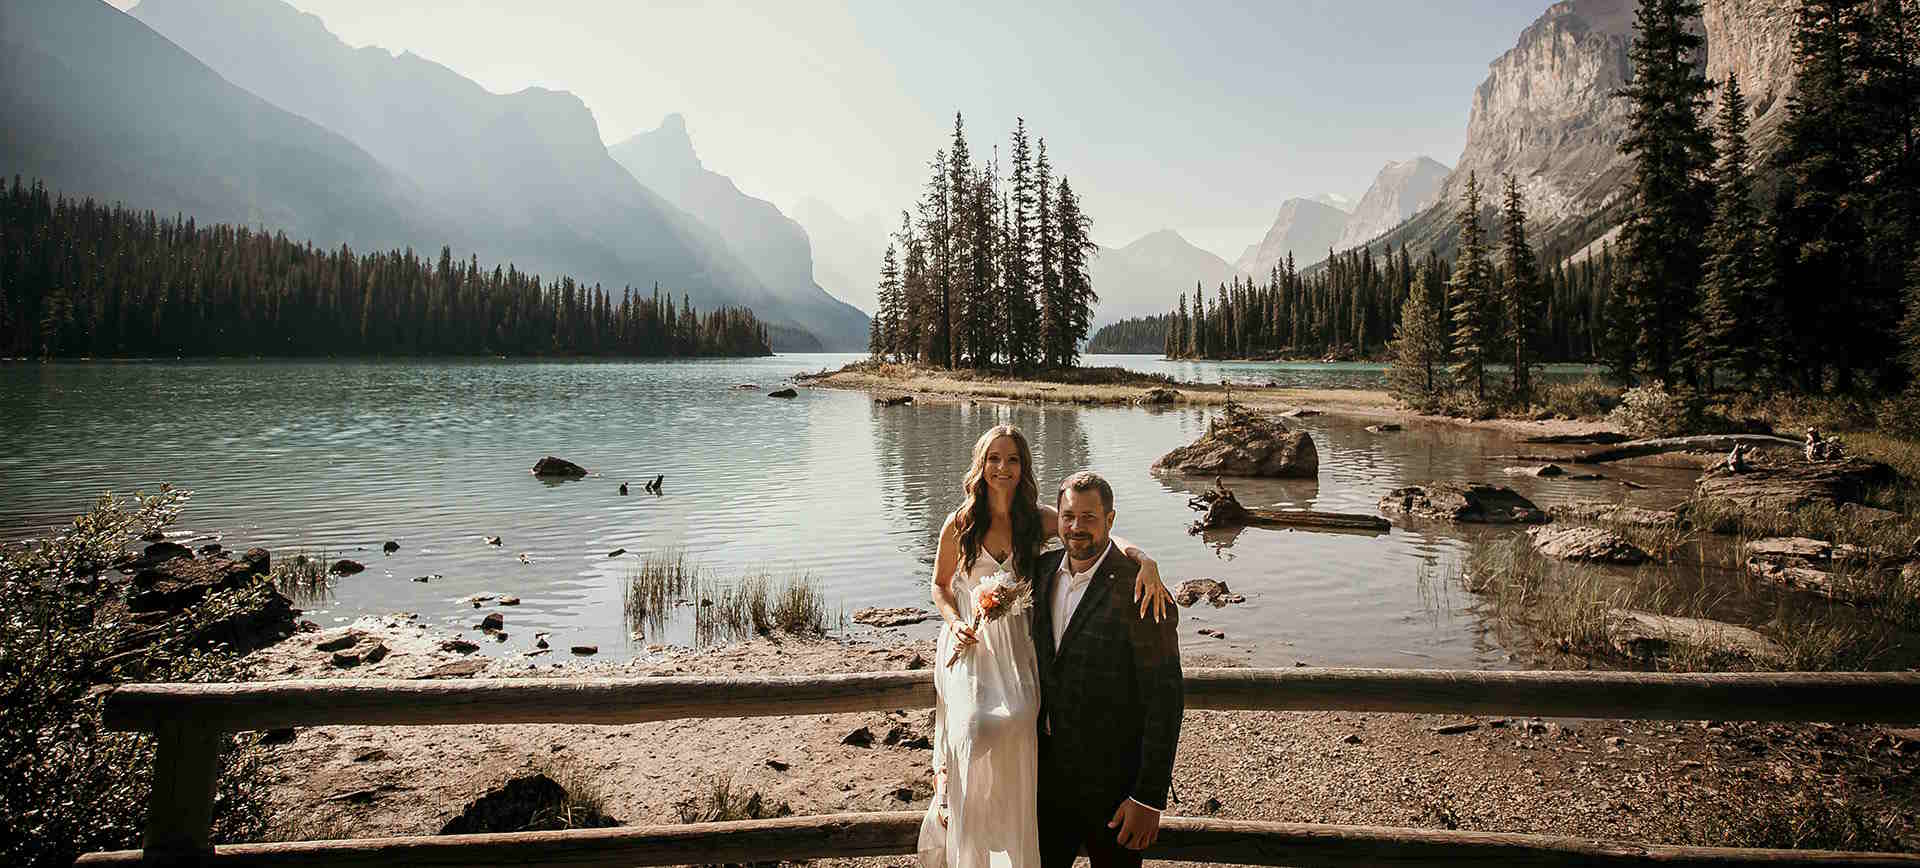 Unforgettable Elopement by Peyto Lake